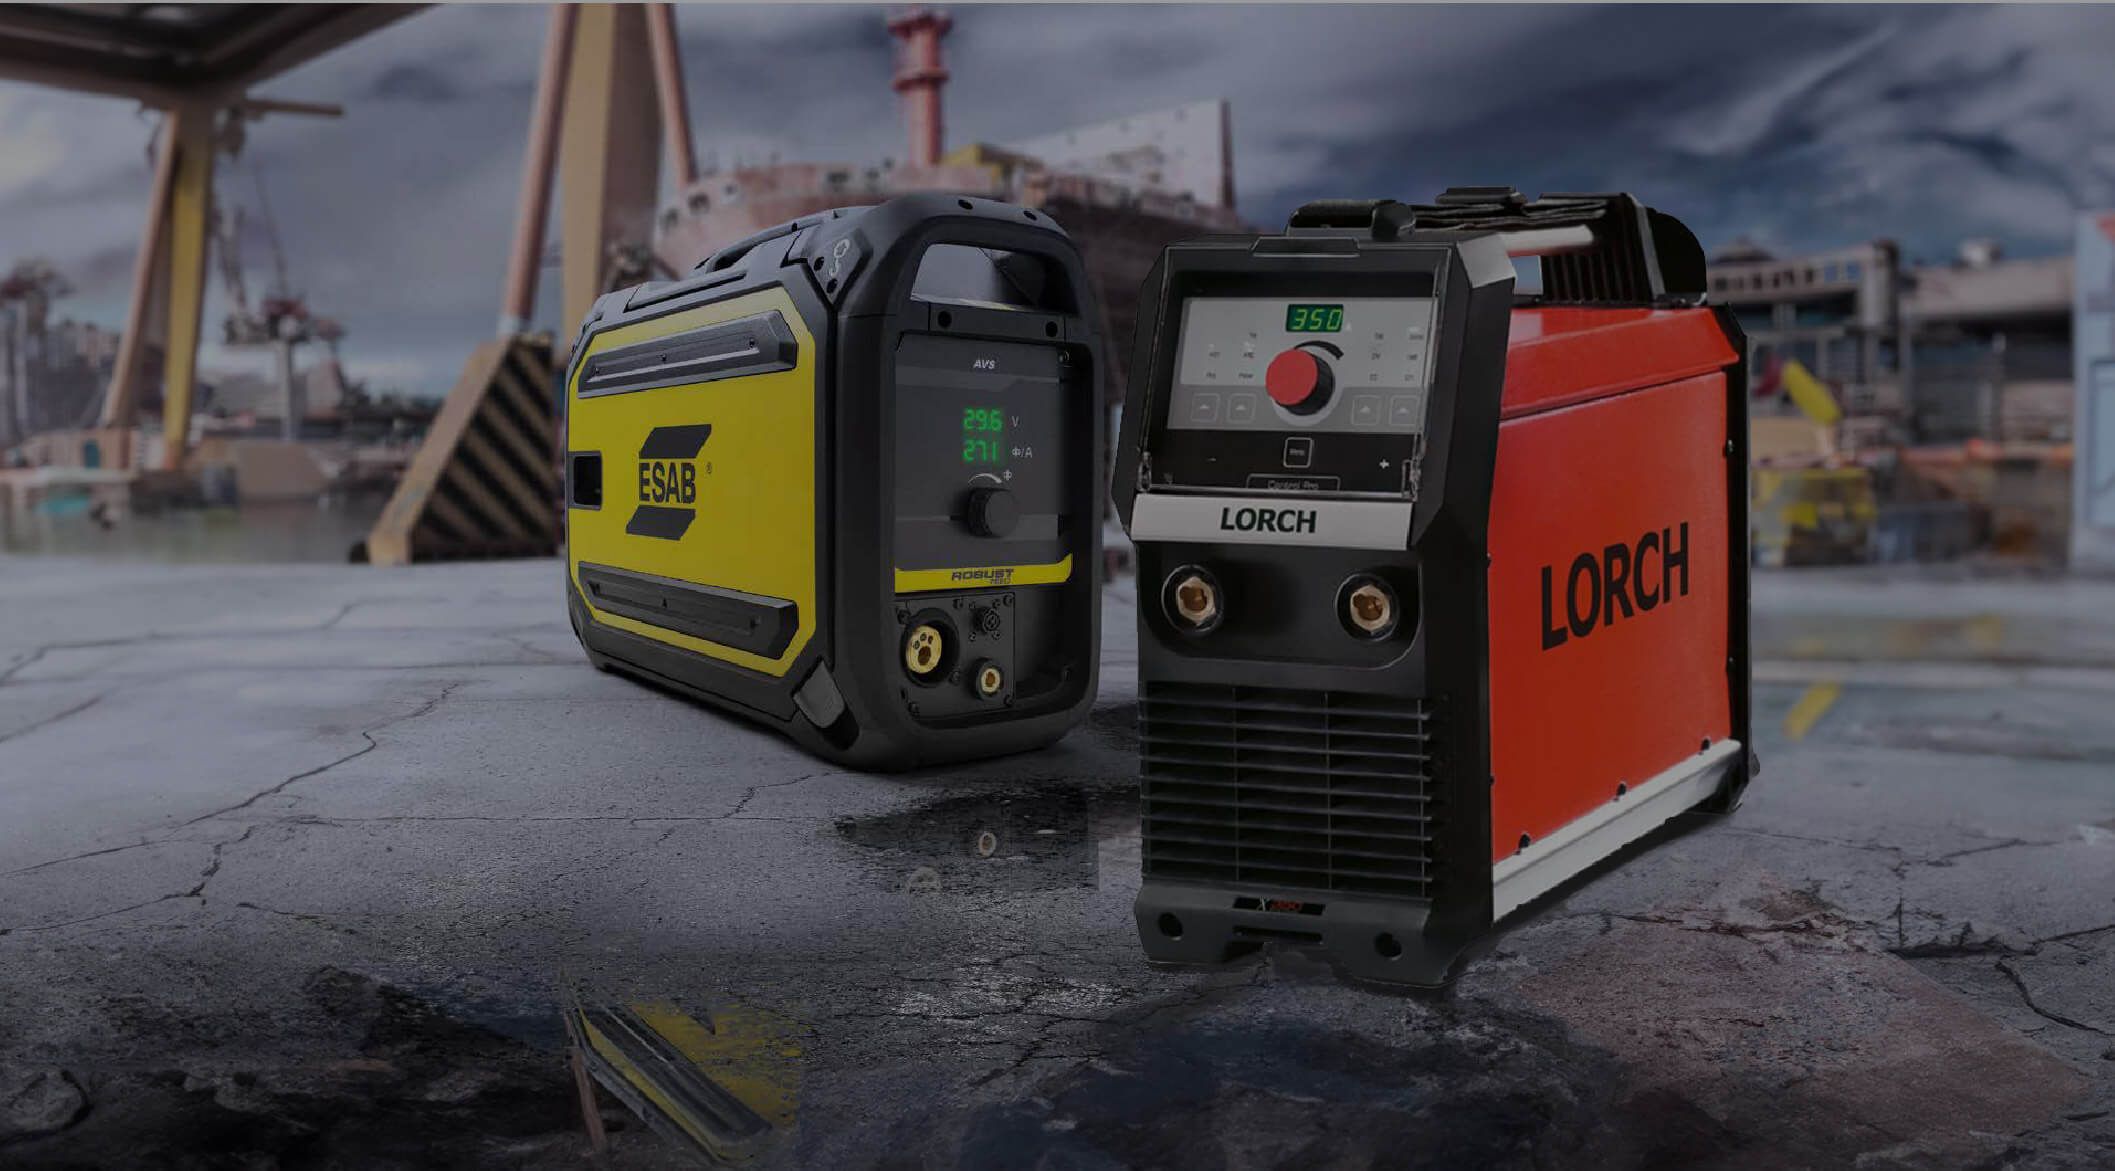 <h2>Dynamic Duo:</h2>   <h3>Lorch X350 and ESAB RobustFeed Redefine Welding Standards</h3>                              <button>Learn More</button>